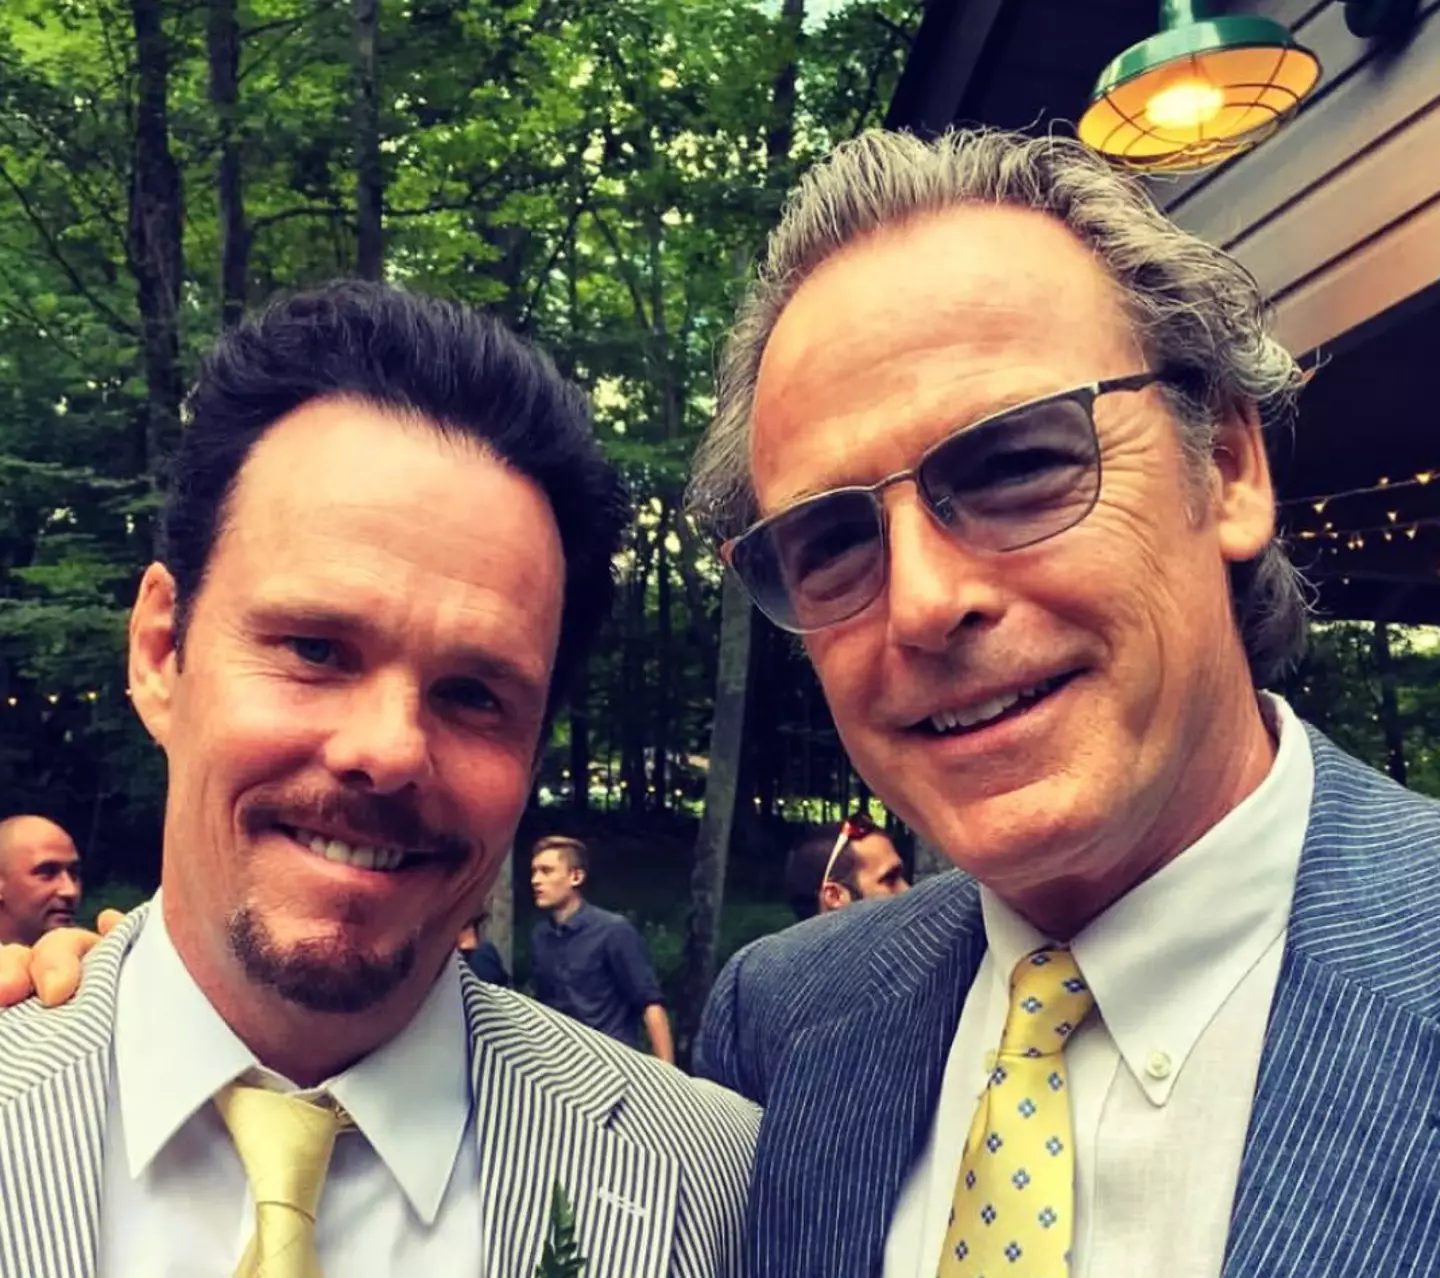 Kevin Dillon paid tribute to McCaffrey.